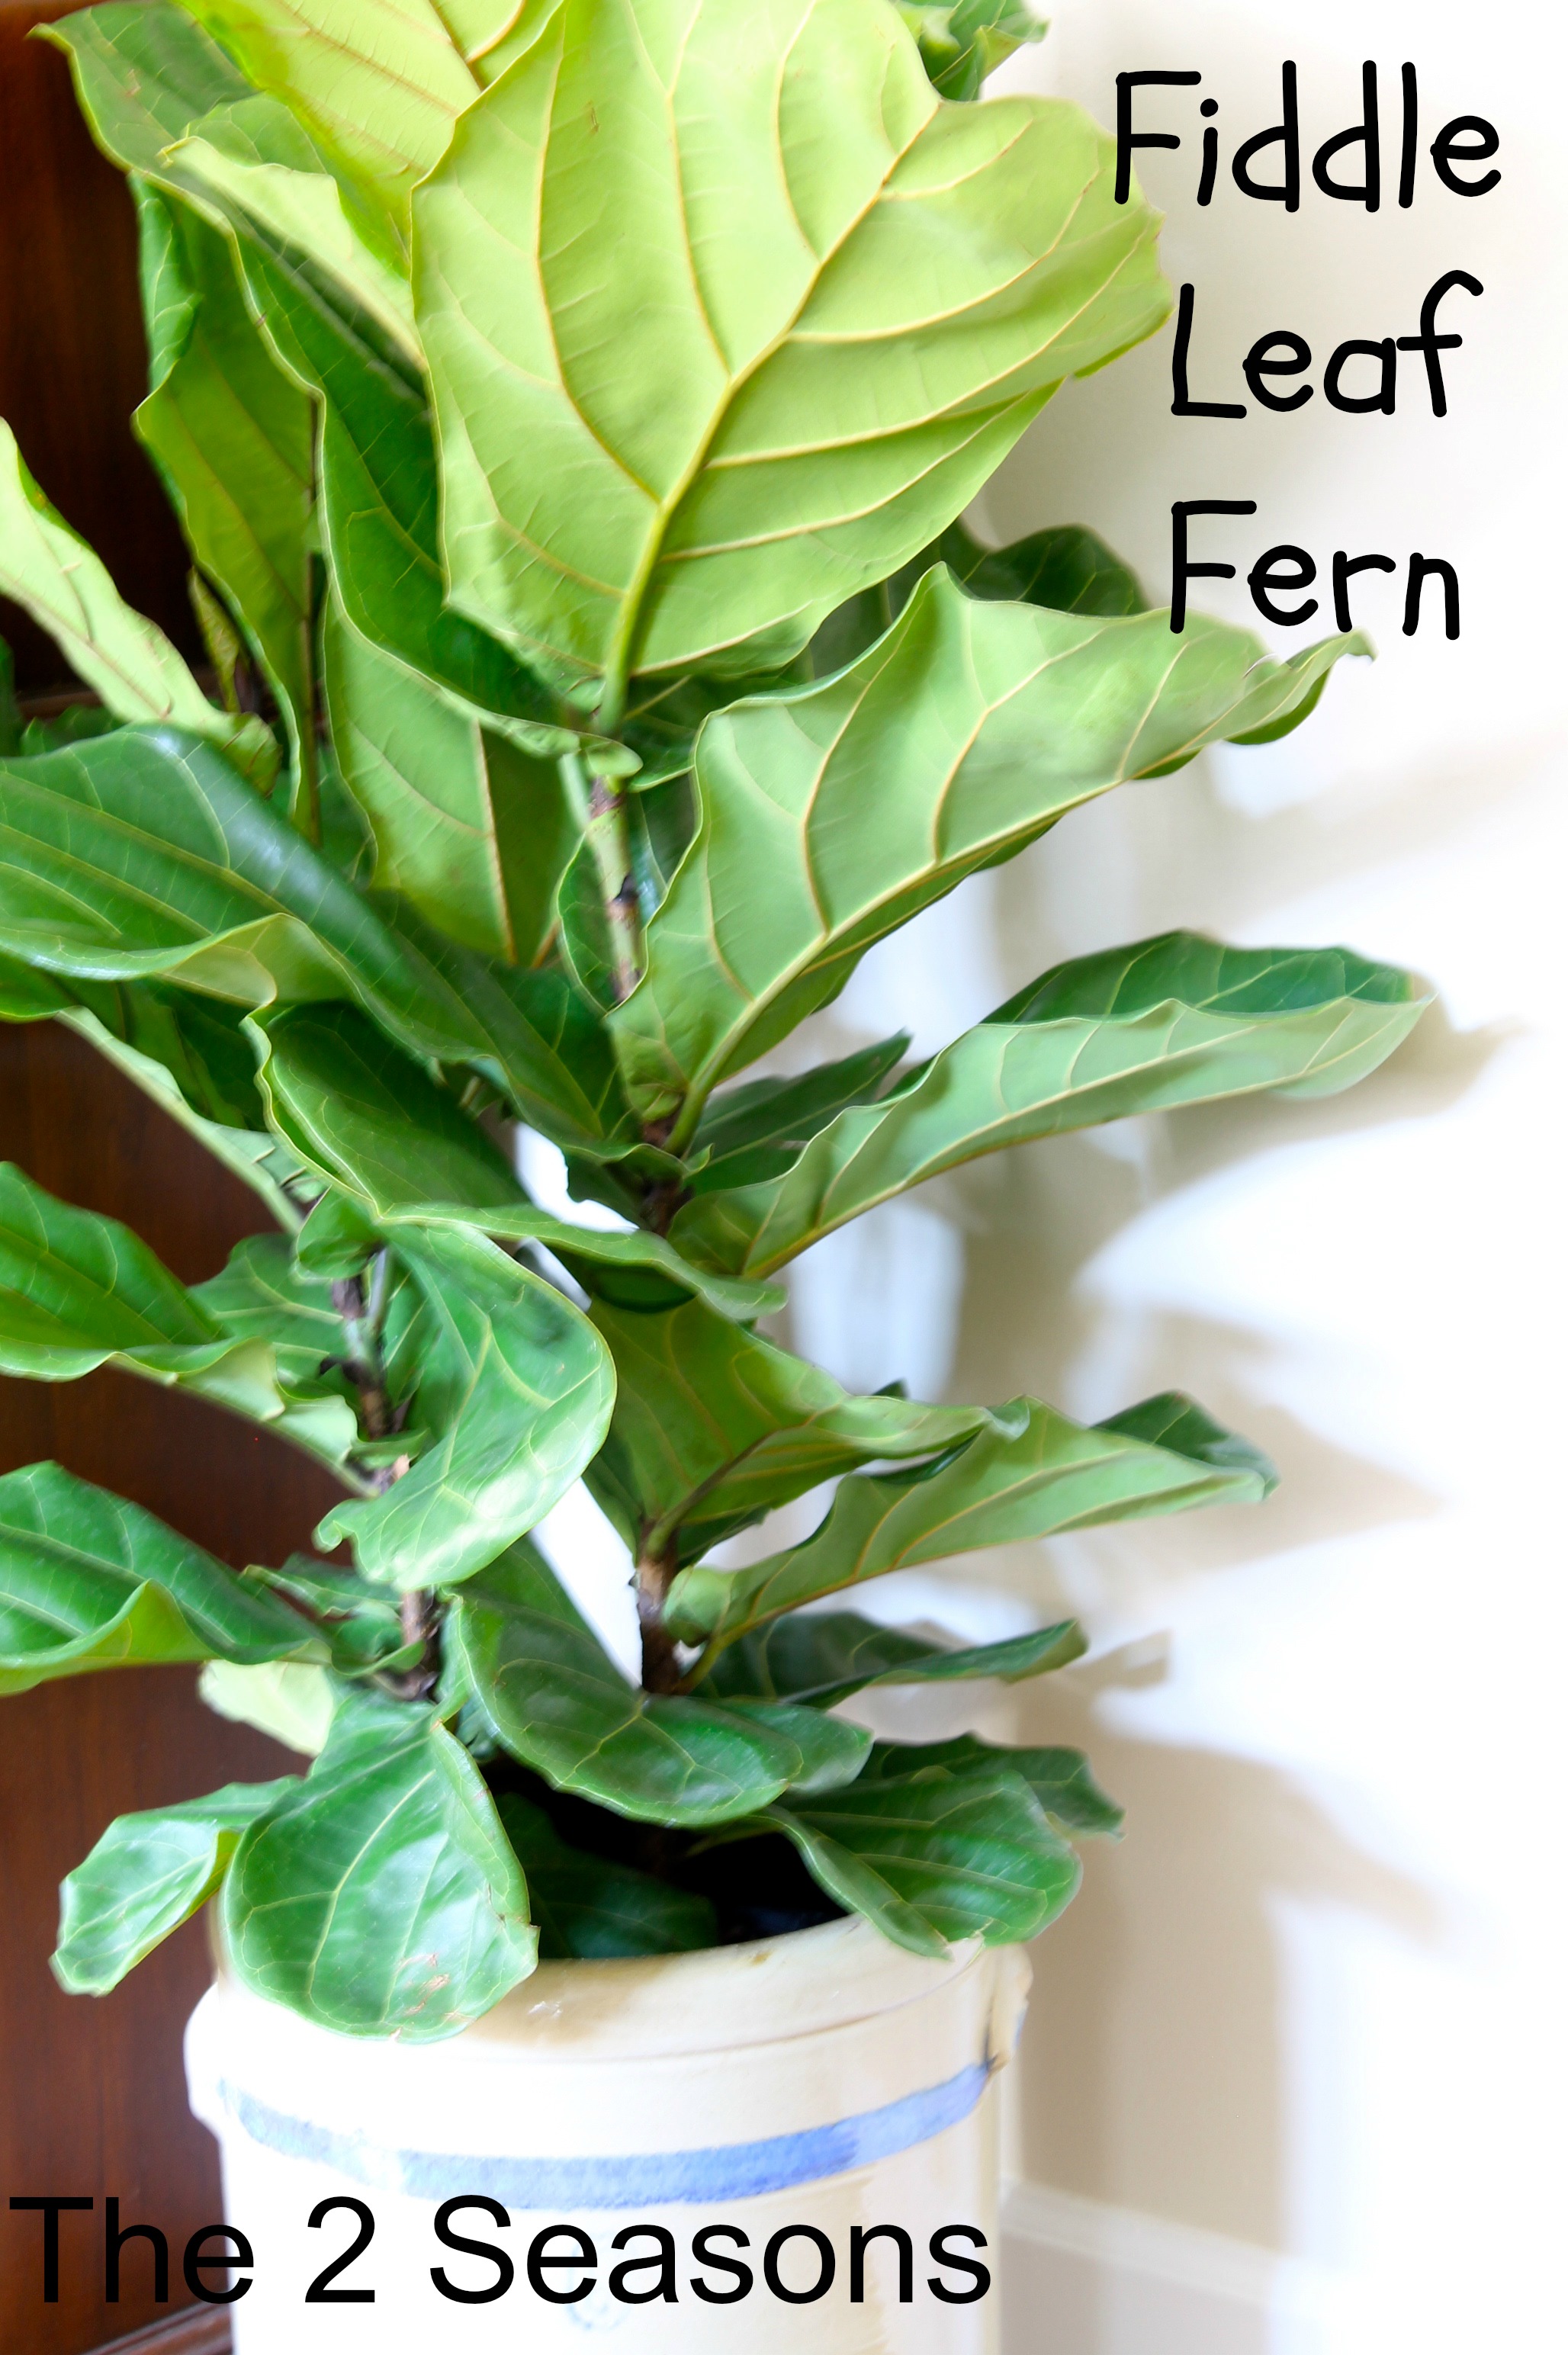 Fiddle Leaf Fern - How to Have Gorgeous Eyebrows